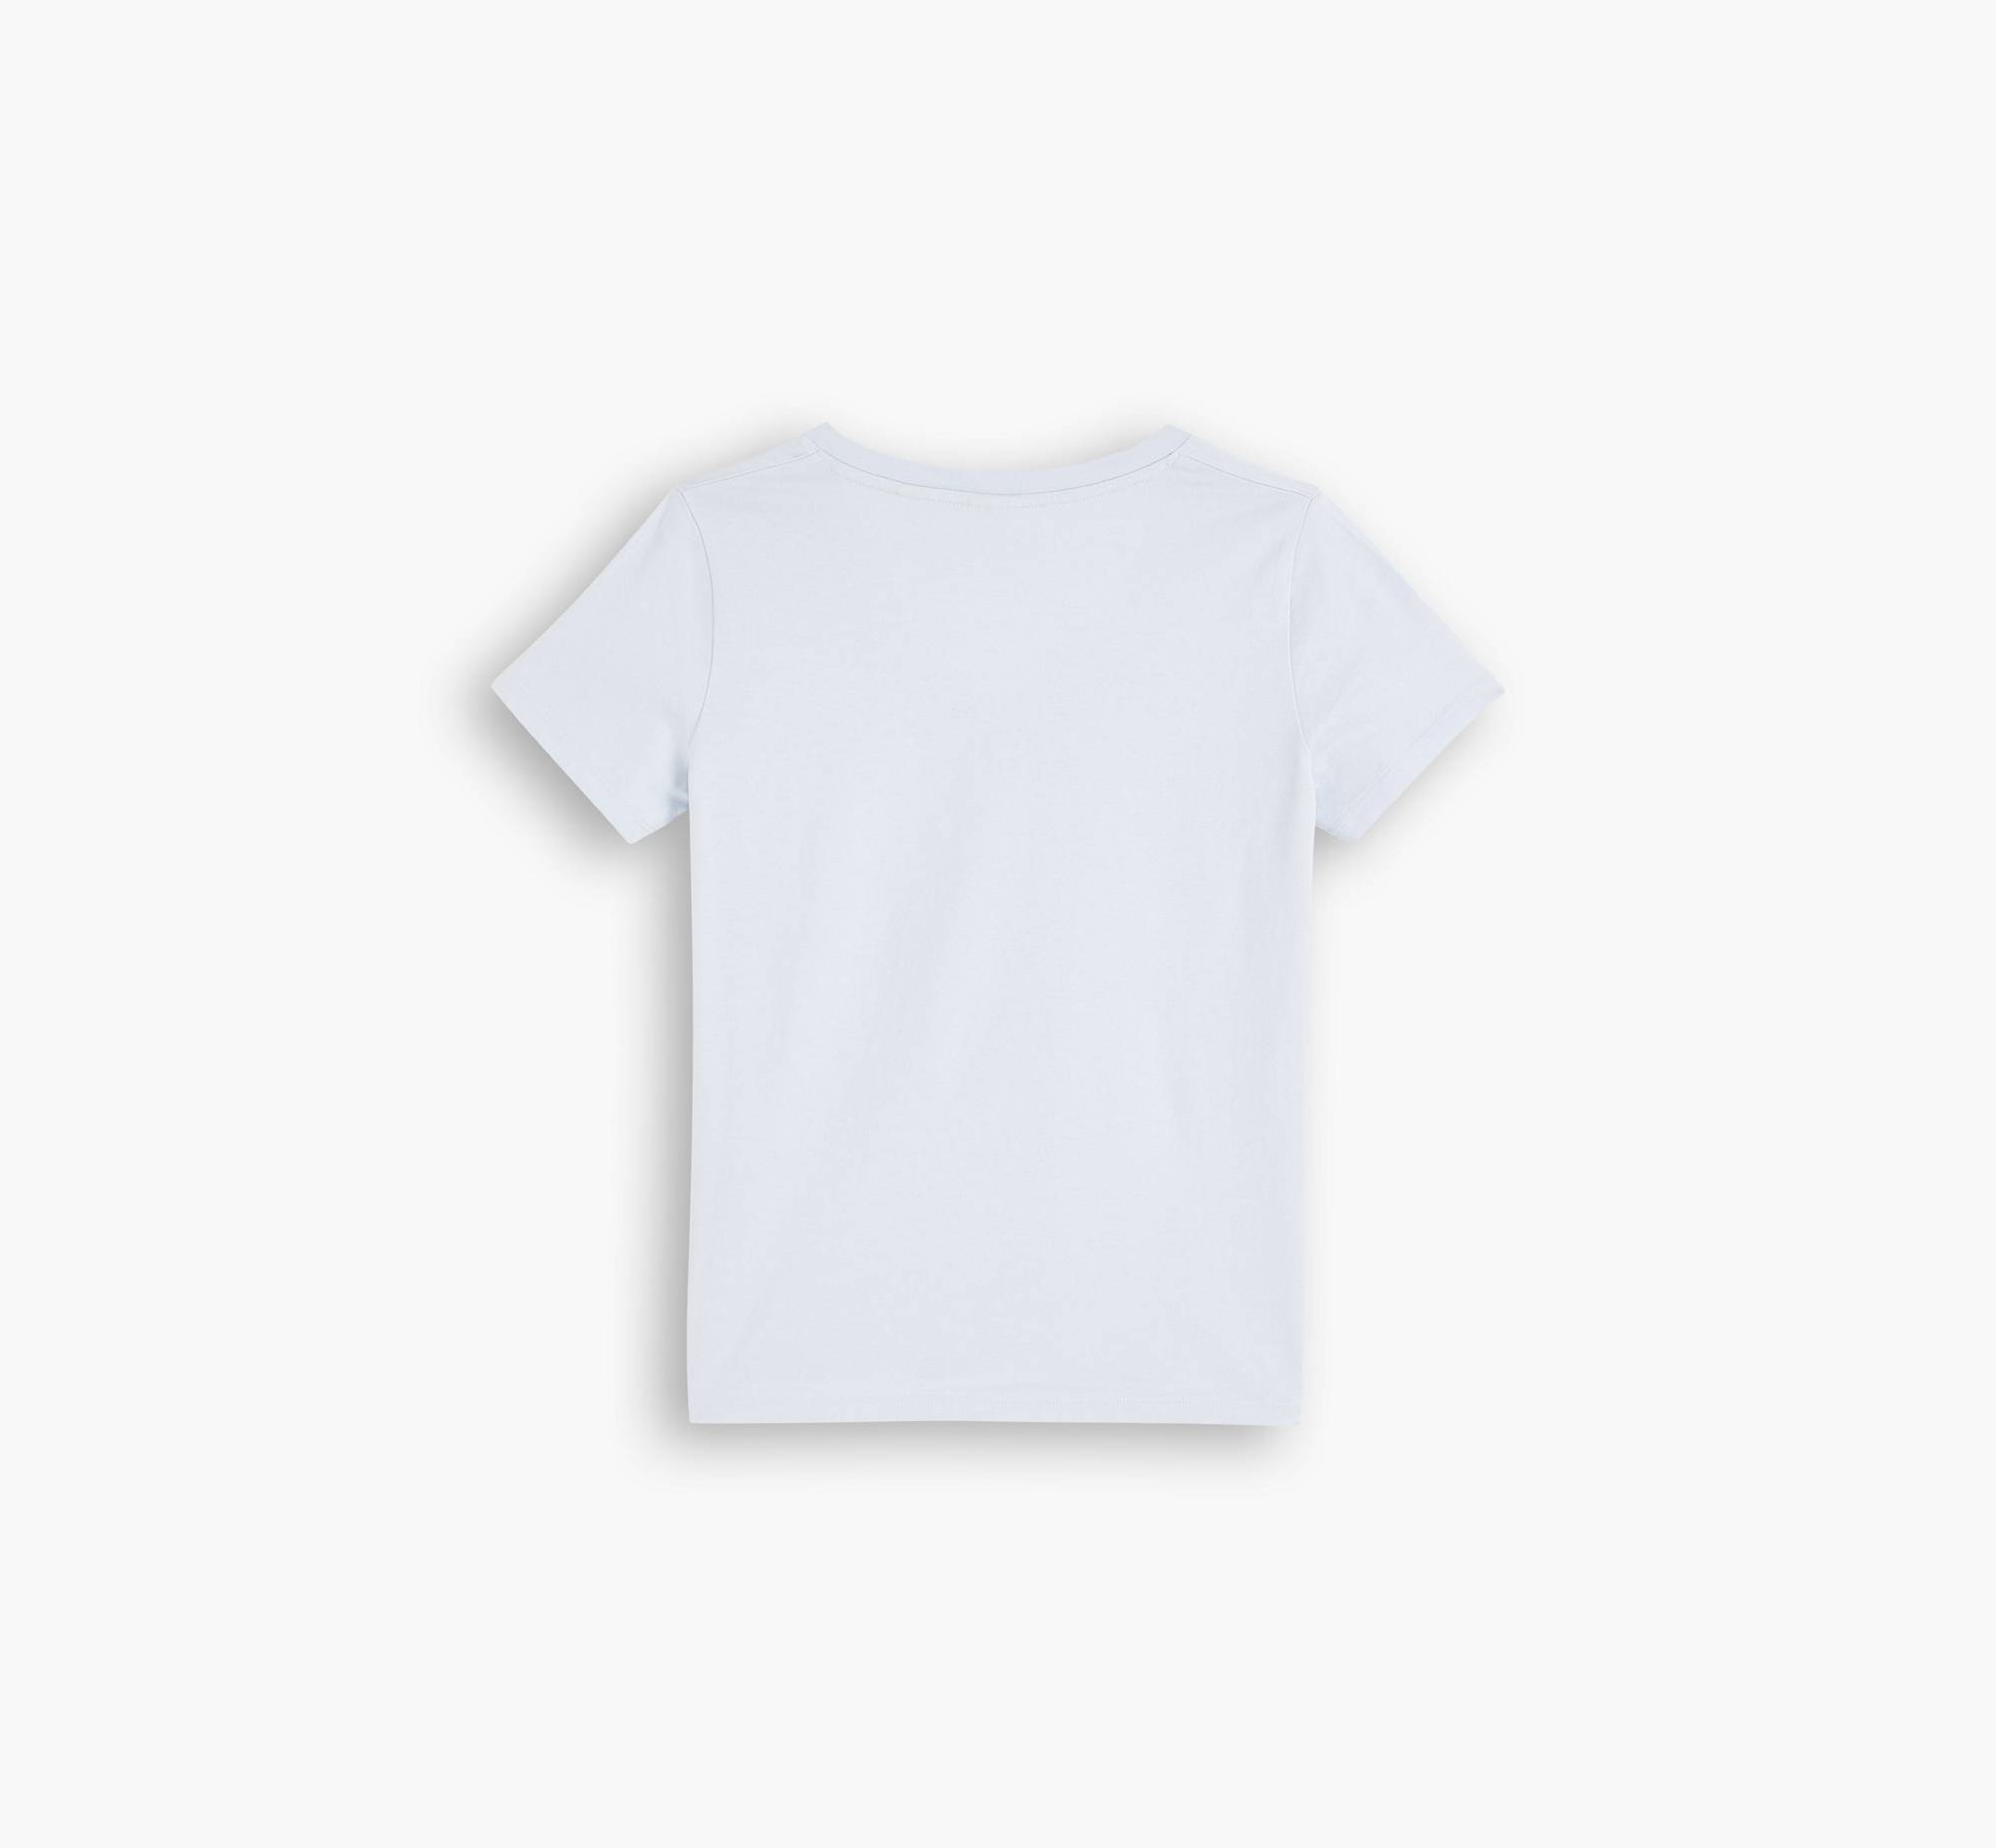 The Perfect Tee V-Neck 5